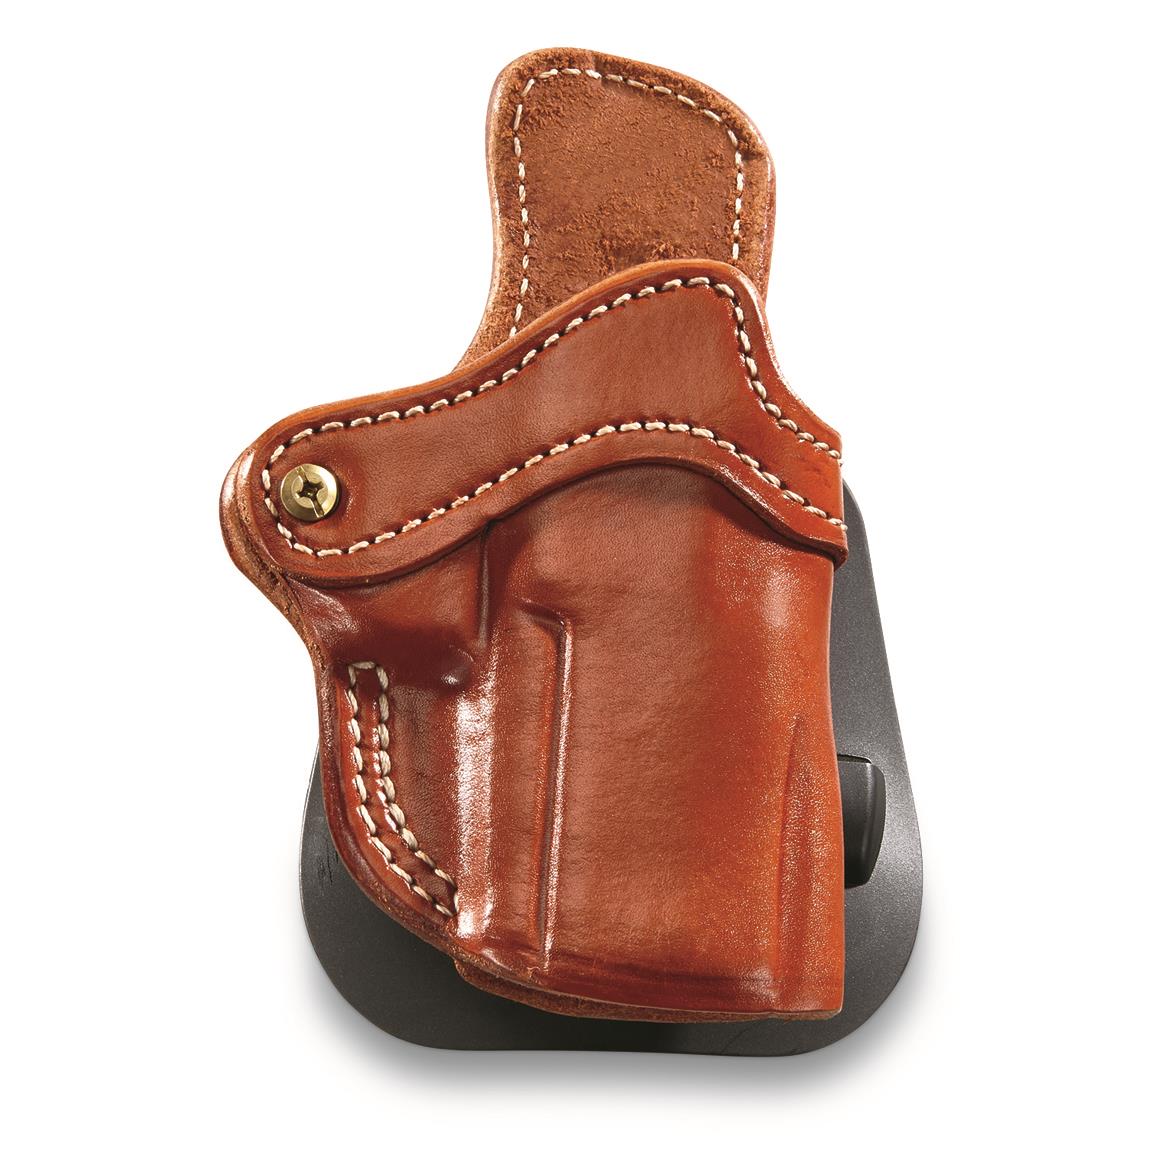 1791 Gunleather Optic Ready 2.4S Paddle Holster, Full Size Compact Pistols, Classic Brown